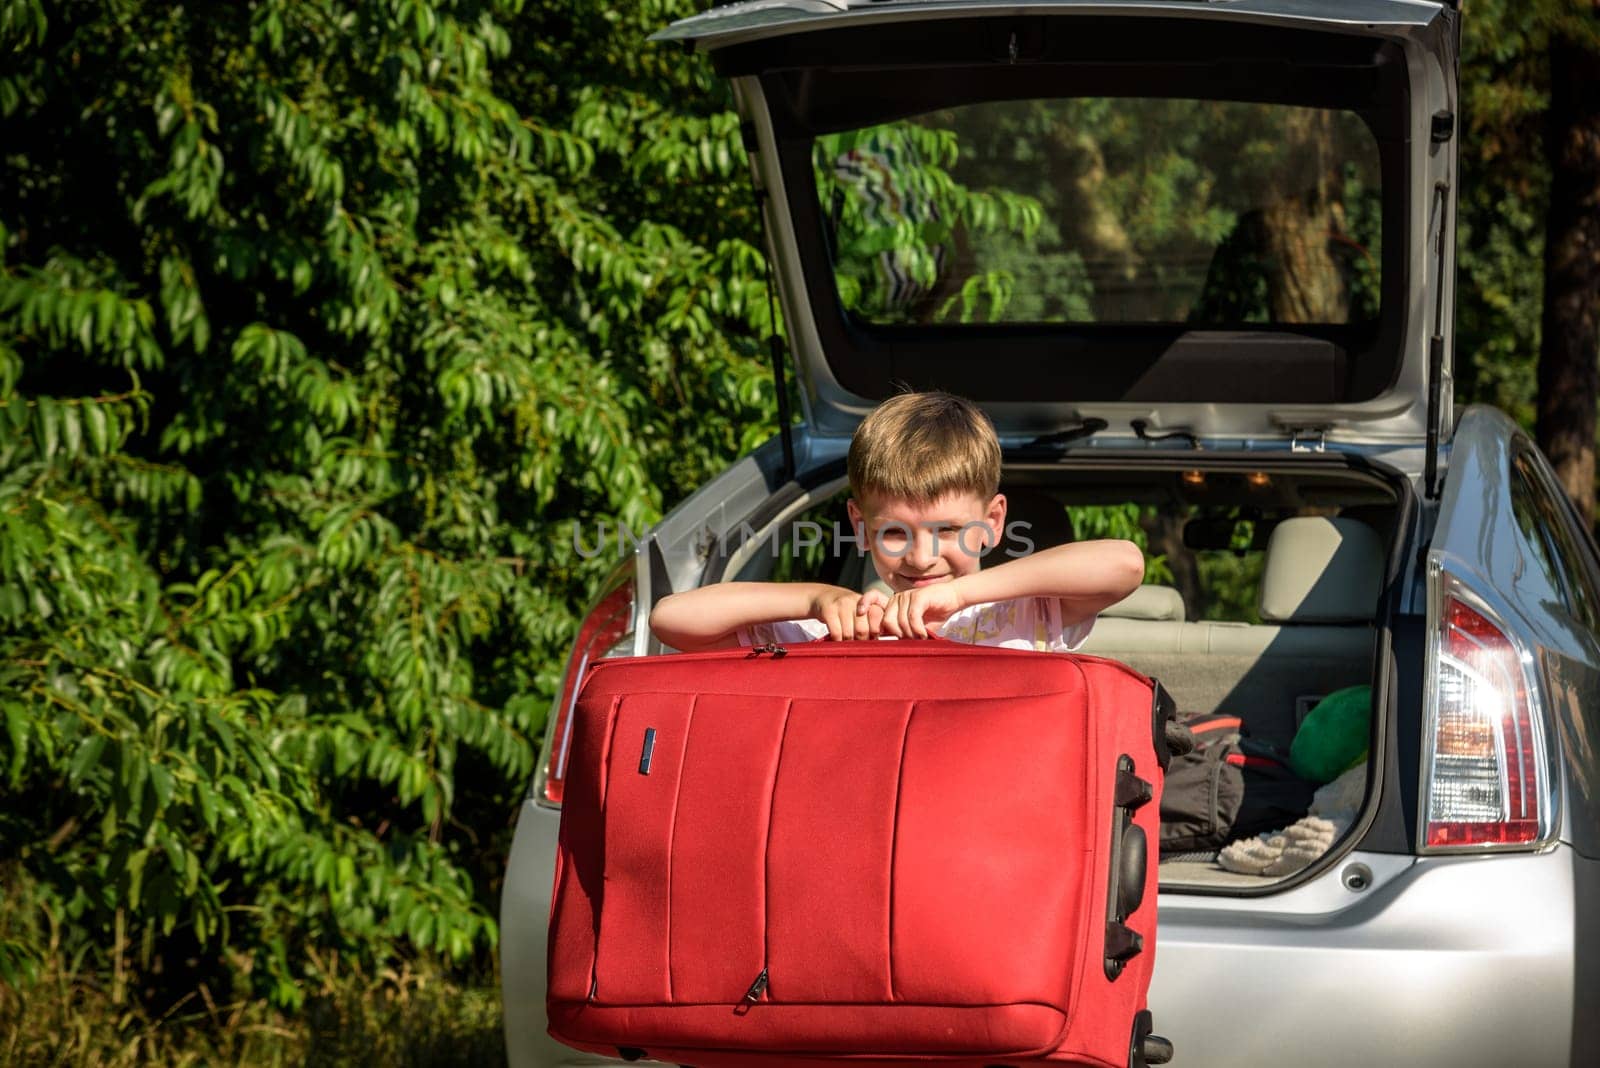 Pretty boy loading the luggage in the trunk of the car. Kid looking forward for a road trip or travel. Family travel by car by Kobysh